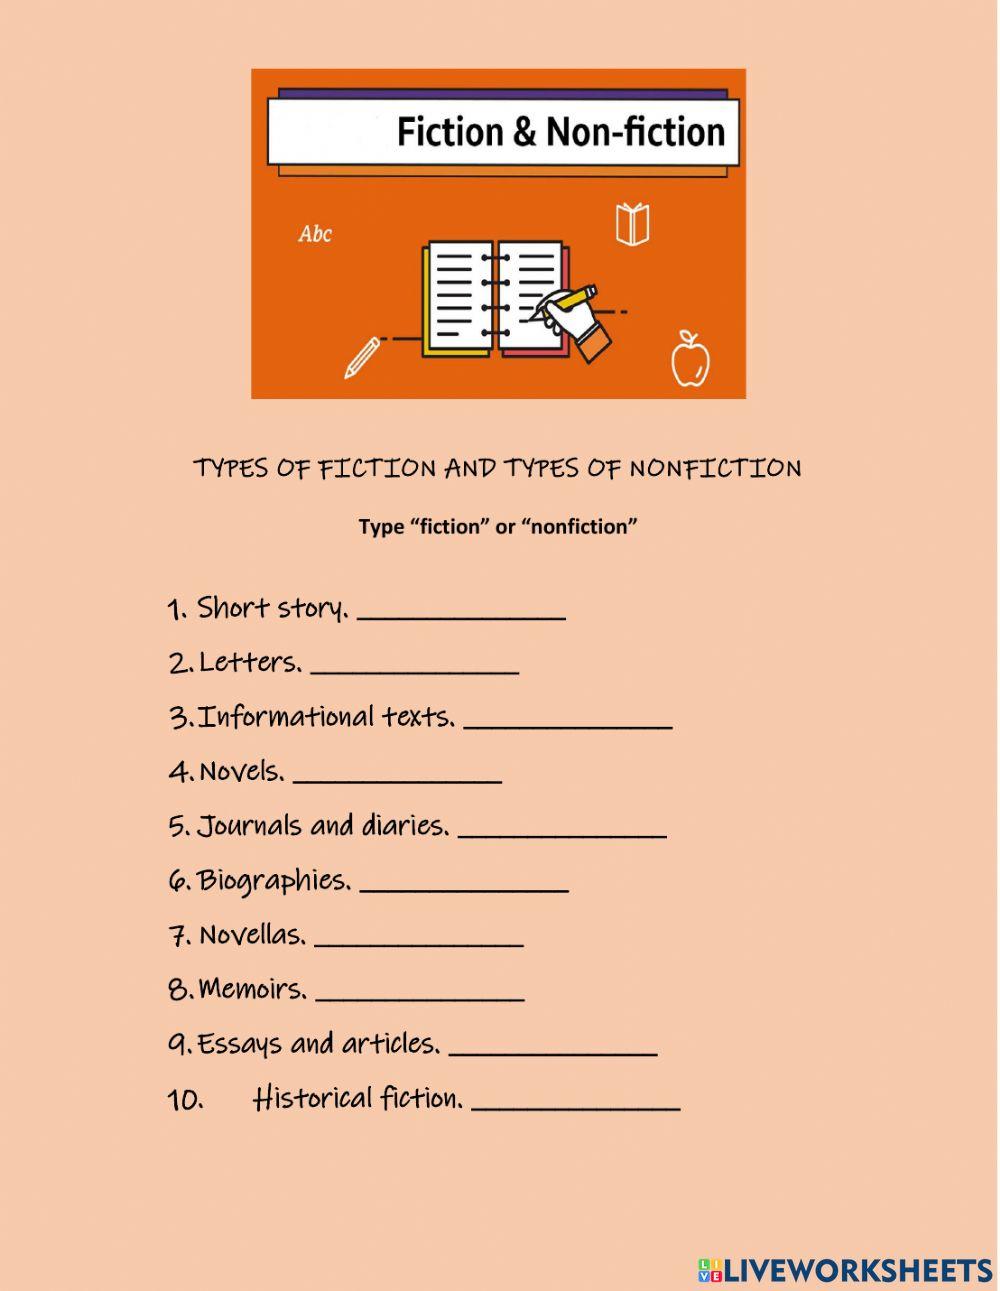 Types of fiction and nonfiction